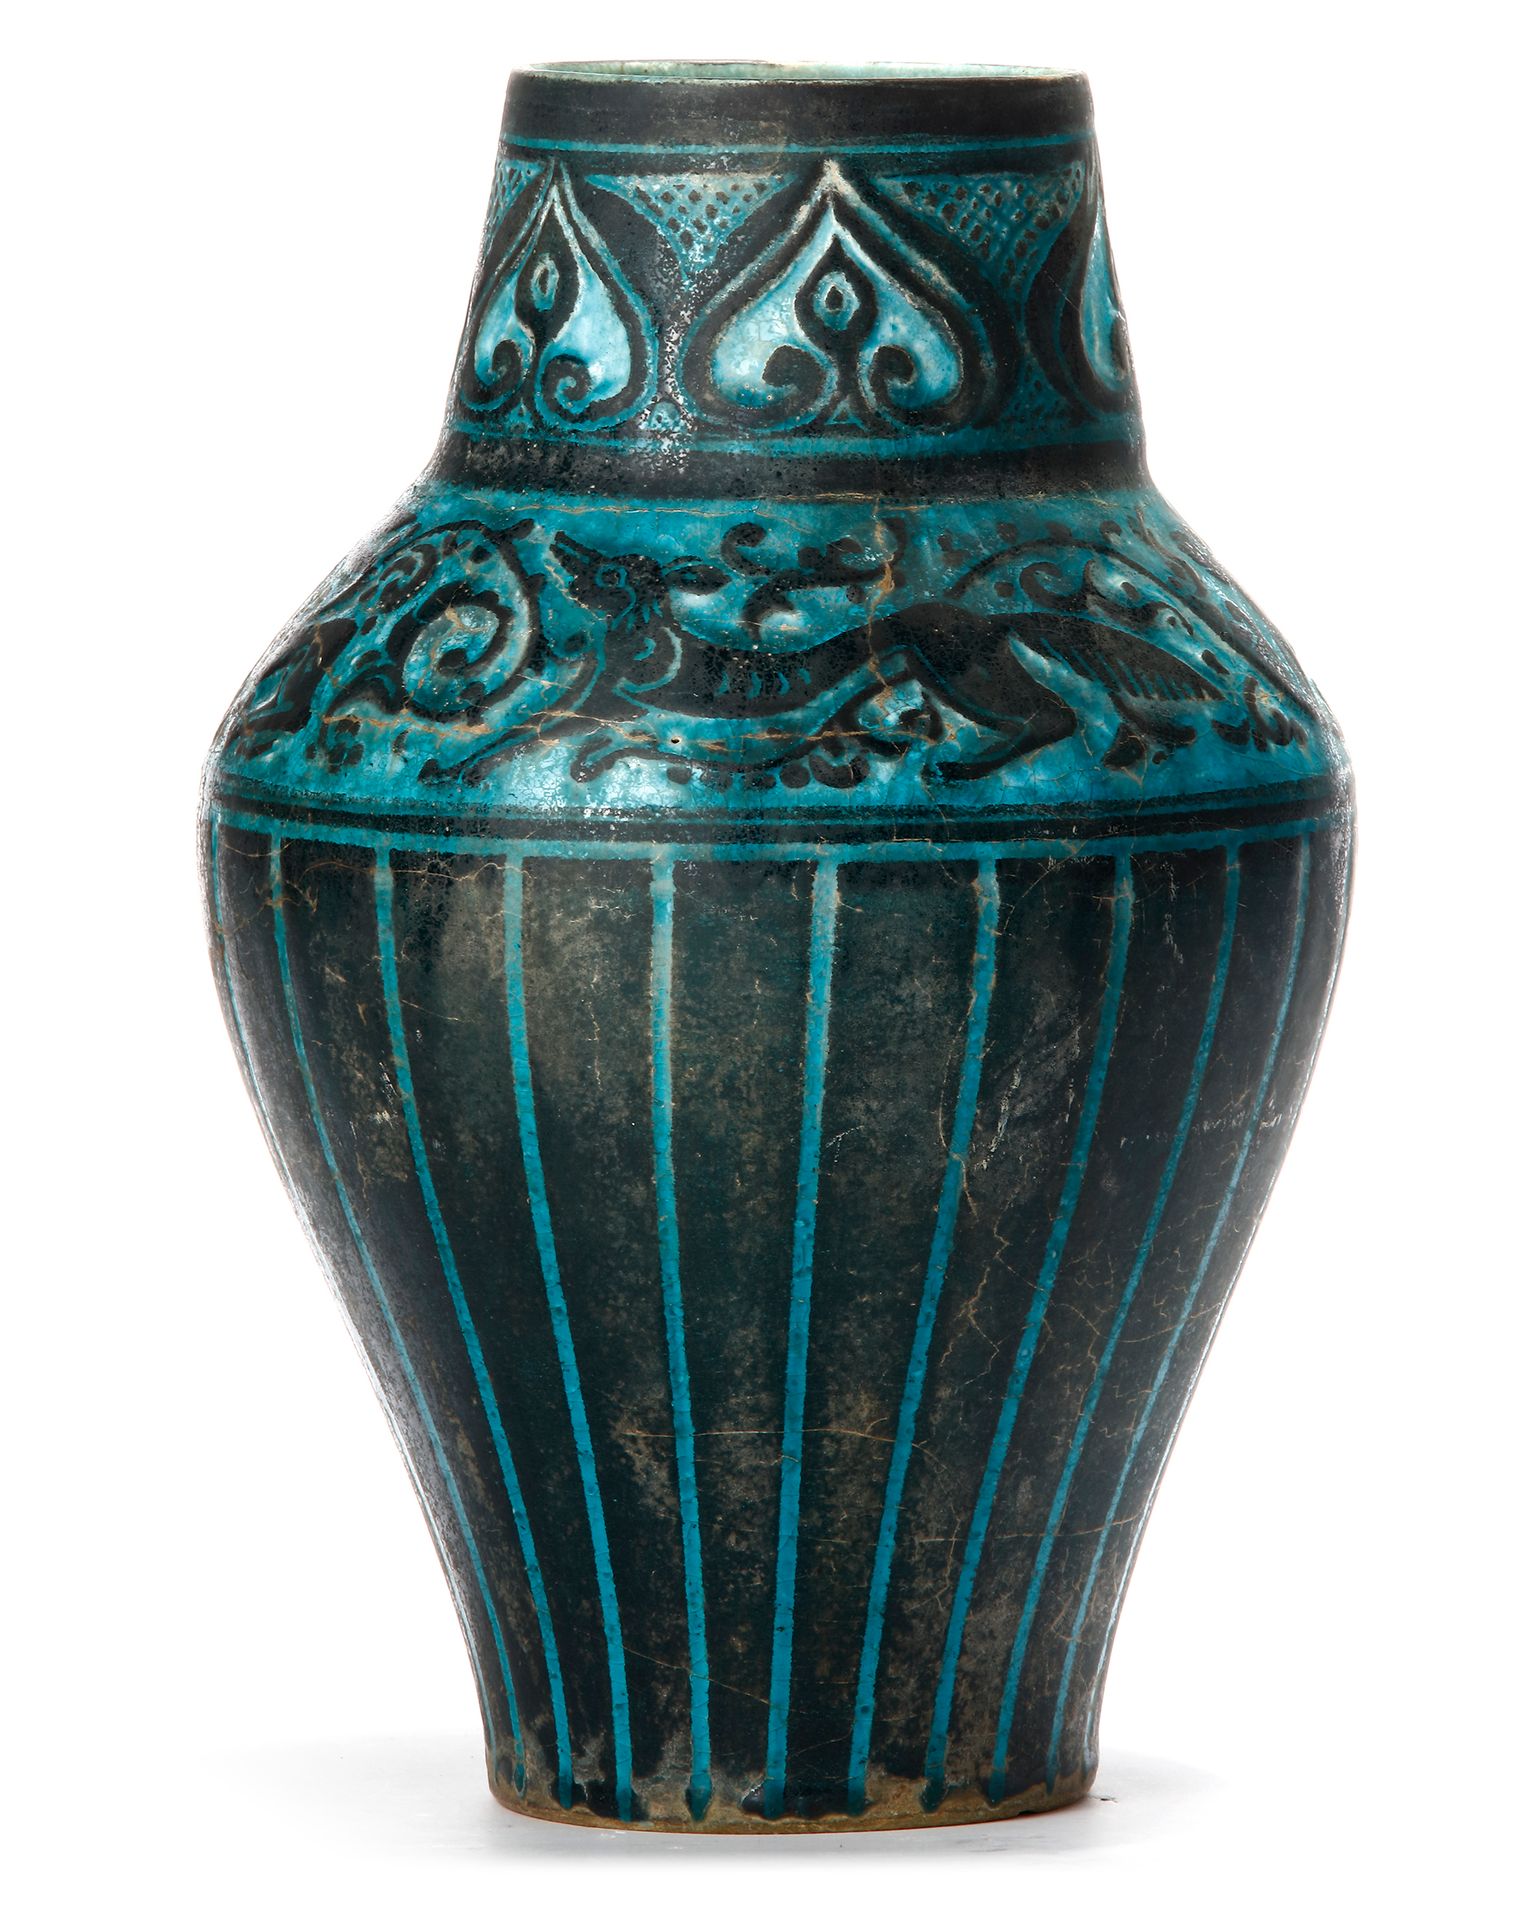 A FINE KASHAN SILHOUETTE-WARE POTTERY VASE, PERSIA, LATE 12TH CENTURY Of baluste&hellip;